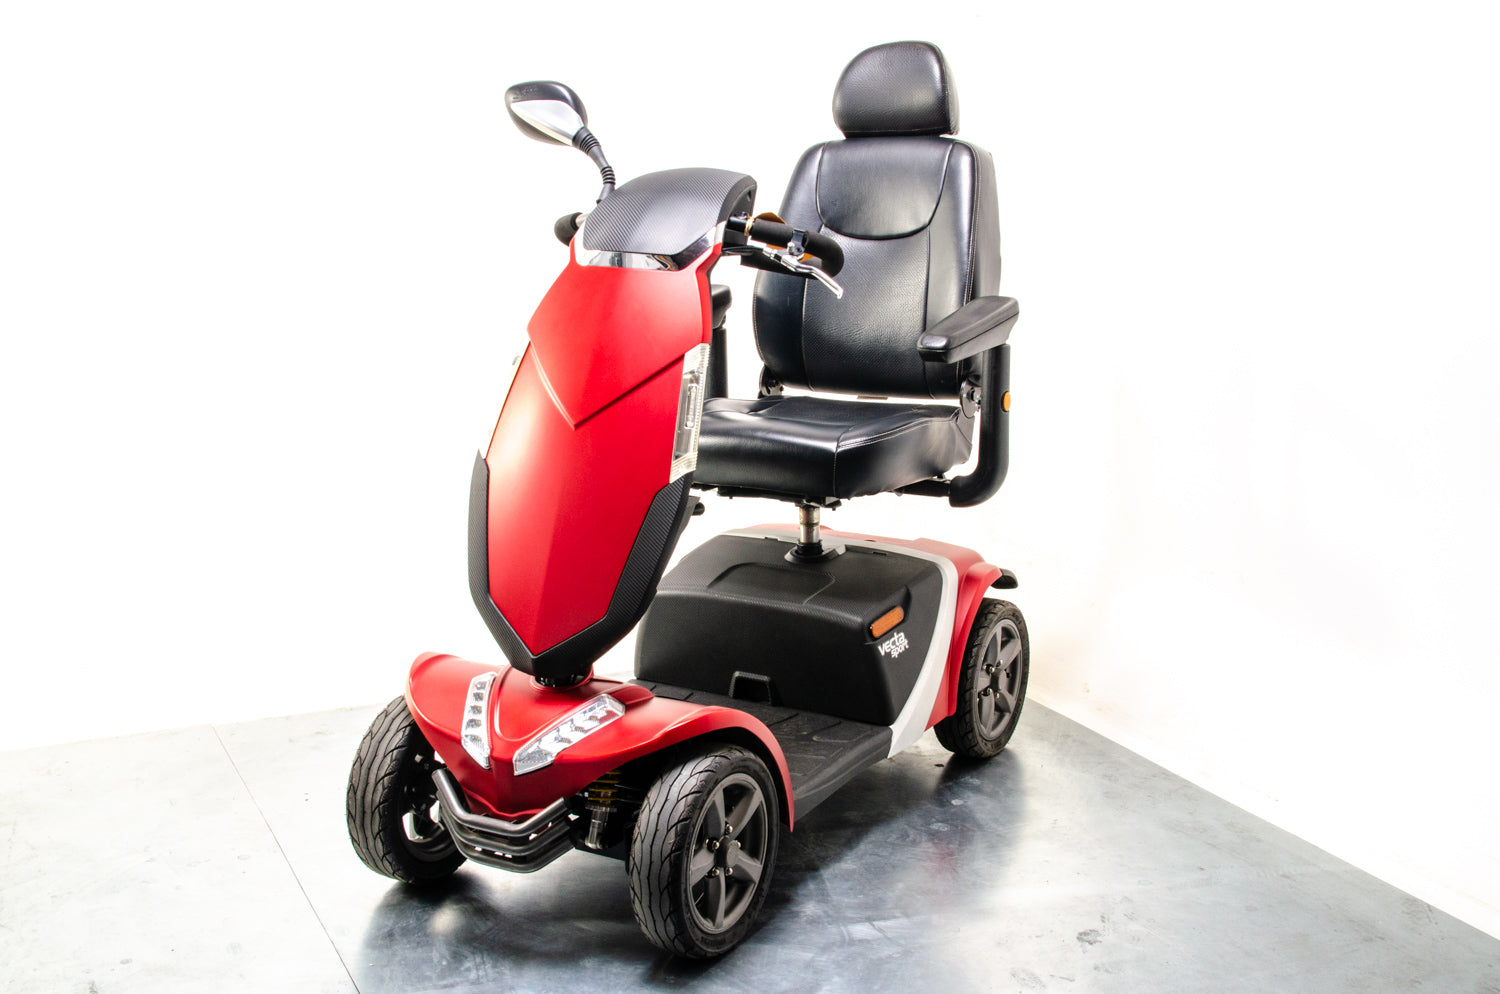 Rascal Vecta Sport Compact Used Electric Mobility Scooter 8mph Max Grip Suspension All-Terrain Red